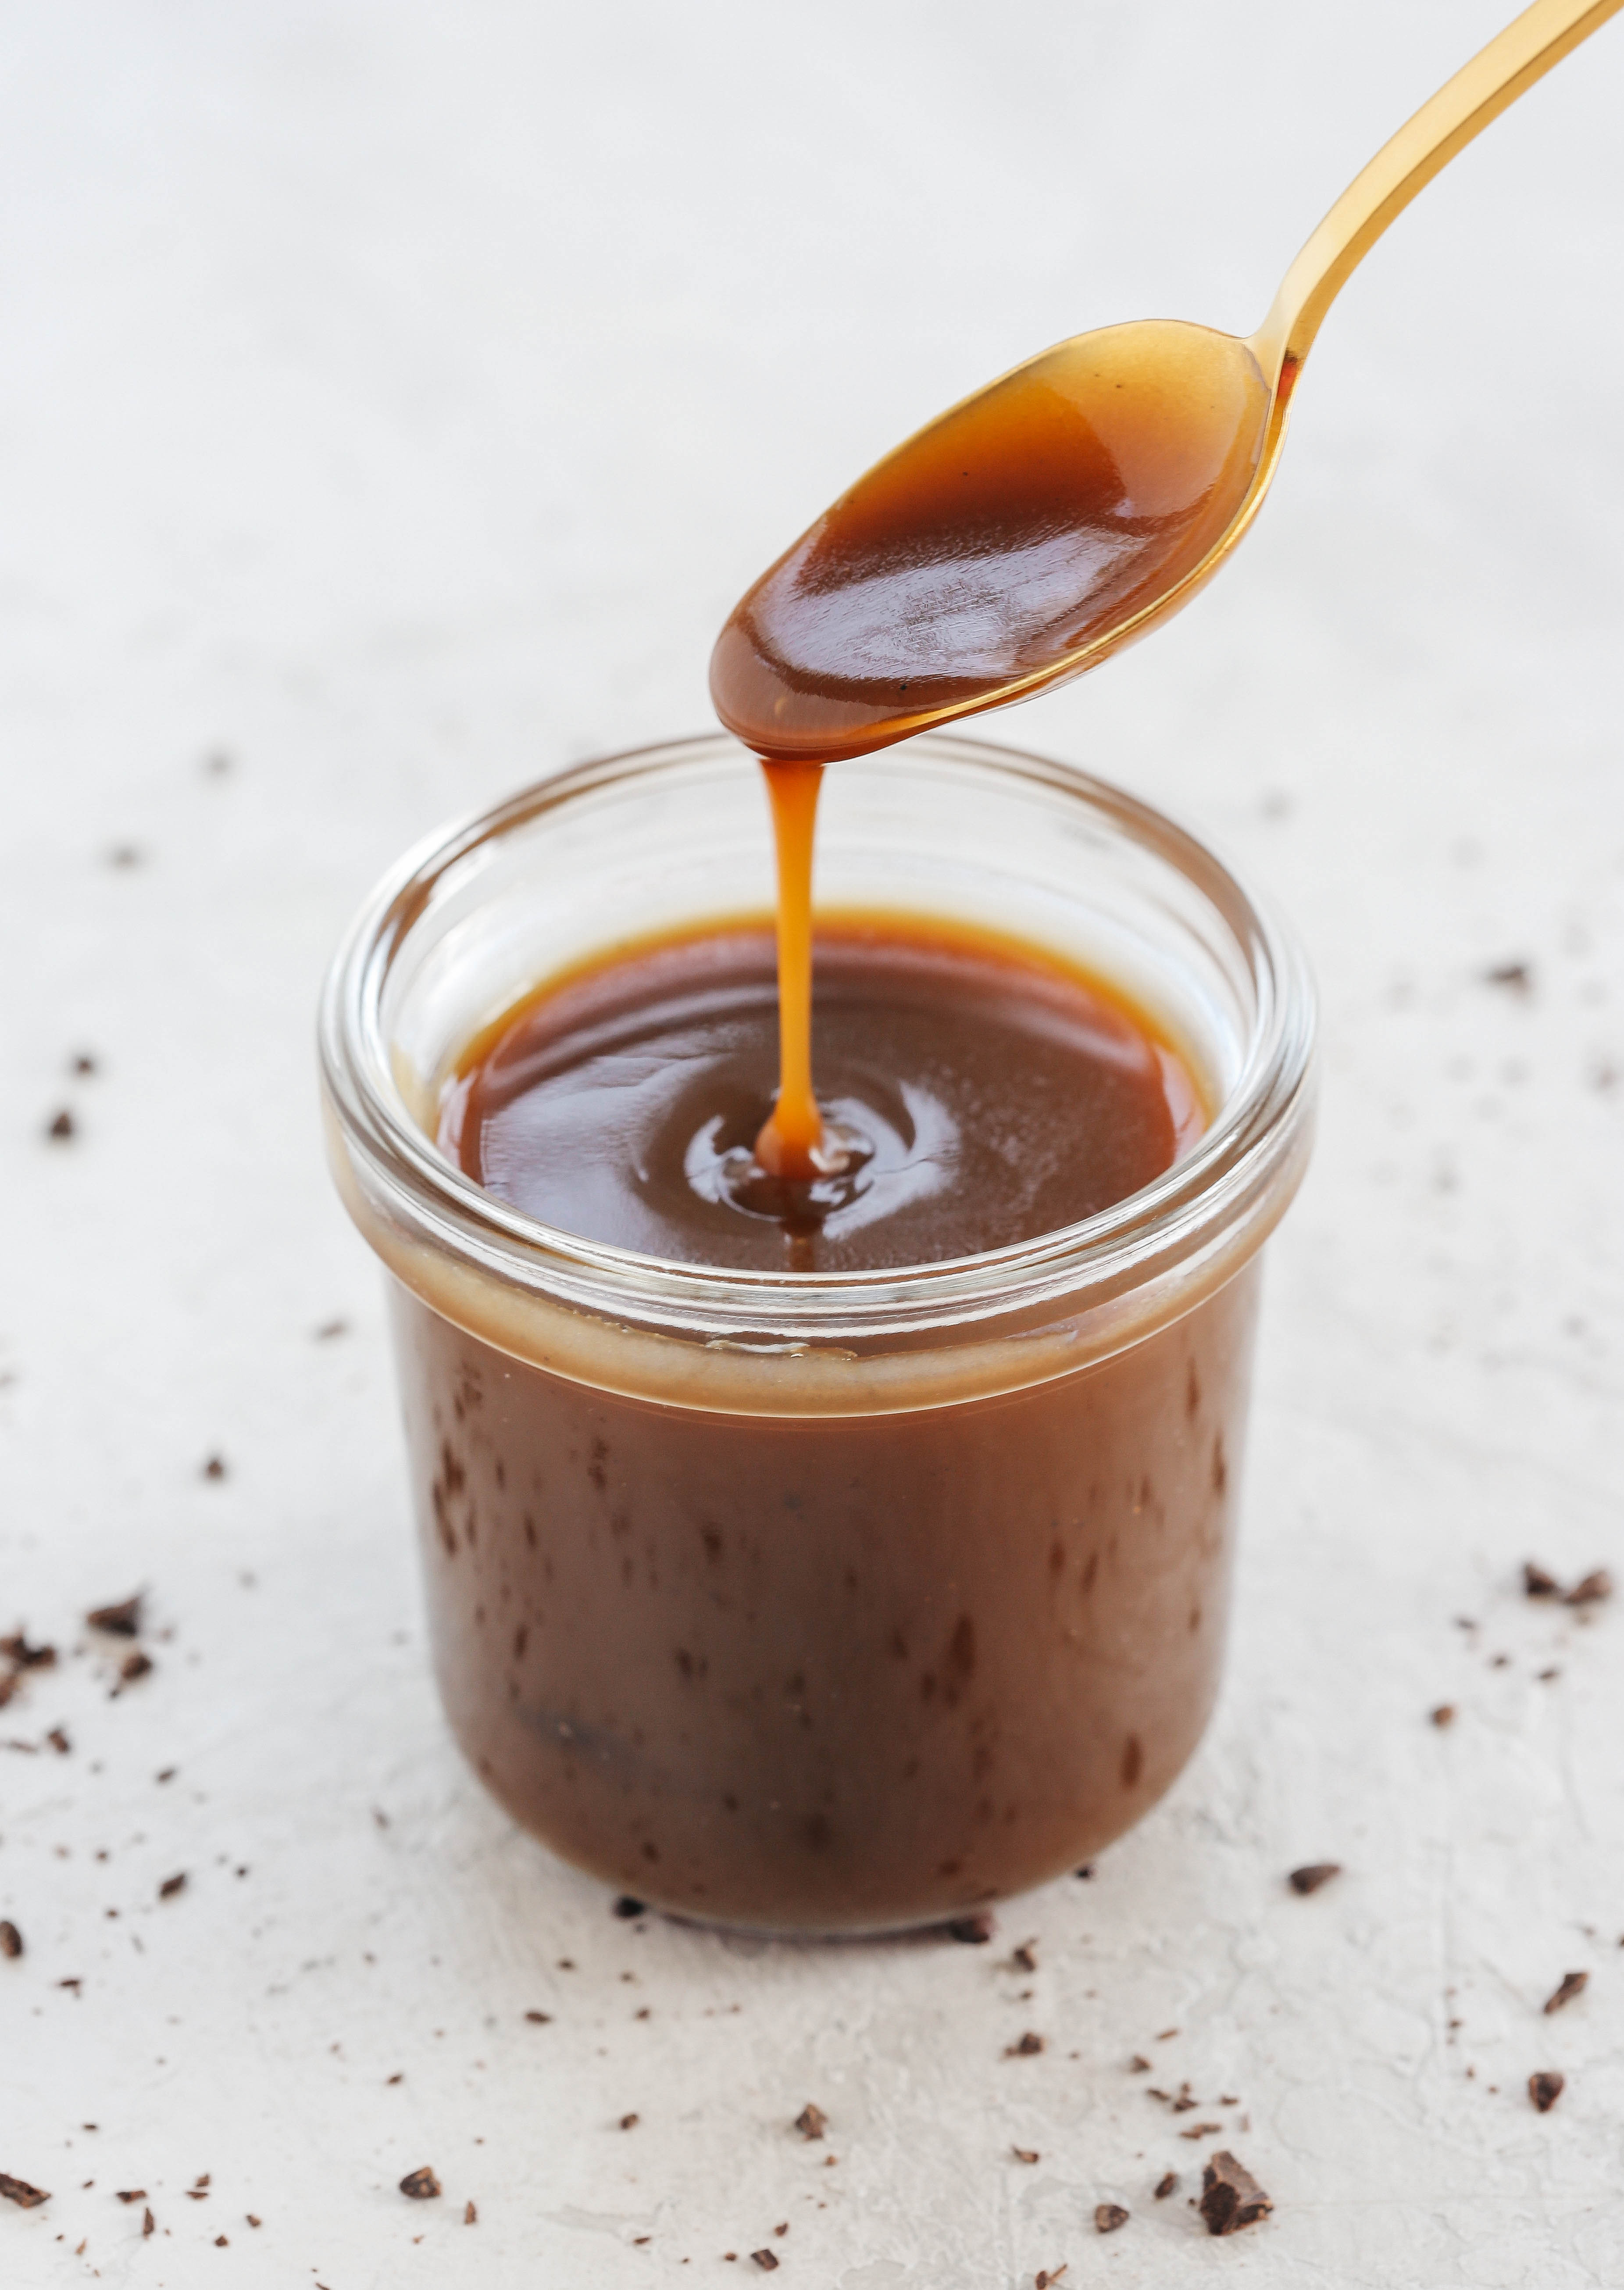 Salted Caramel Overnight Oats drizzled with a sweet homemade caramel sauce easily made in just minutes the night before giving you a deliciously decadent breakfast as soon as you wake up!